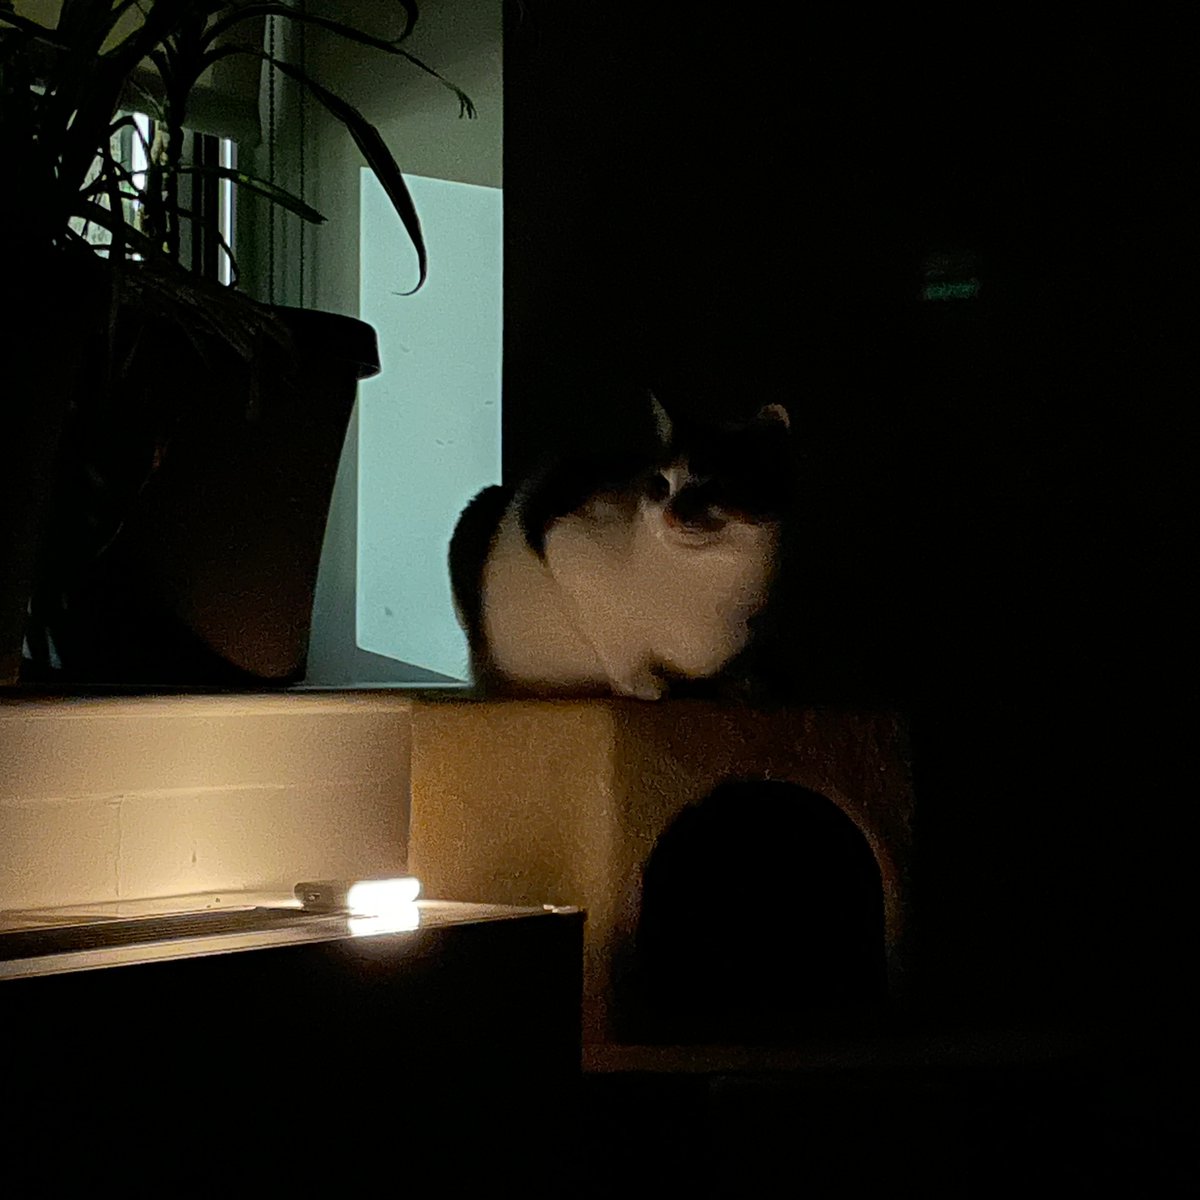 Jasper protects the bedroom late at night.
.
#jasperthegreat #domesticshorthair #meow #cat #cats  #pets #nyccats #kitty #thedailykitten #pawsandpaws #instacat #dailyfluff #petoftheday #bestmeow #catlovers #catlife #catstagram